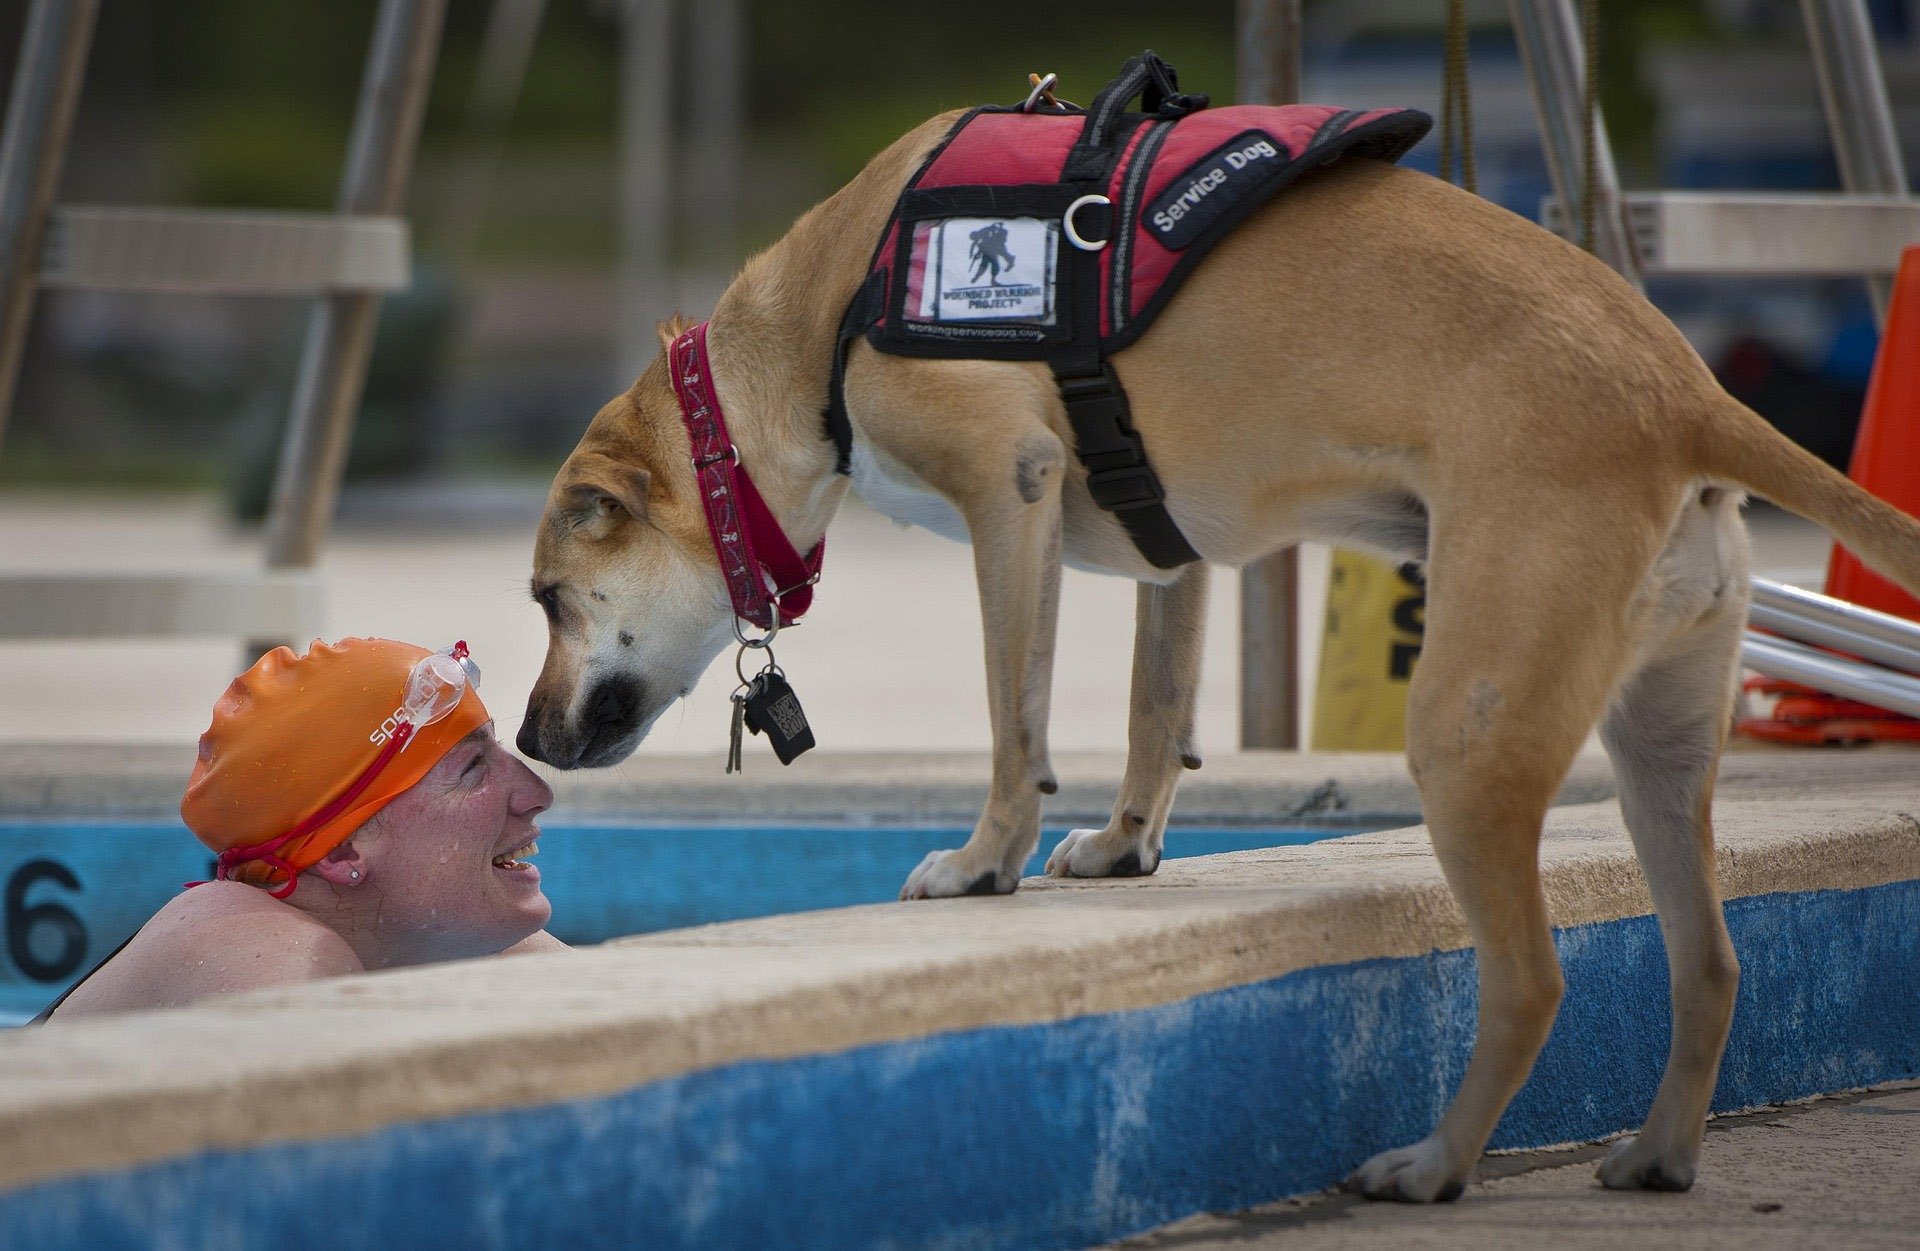 Service dog with person in pool